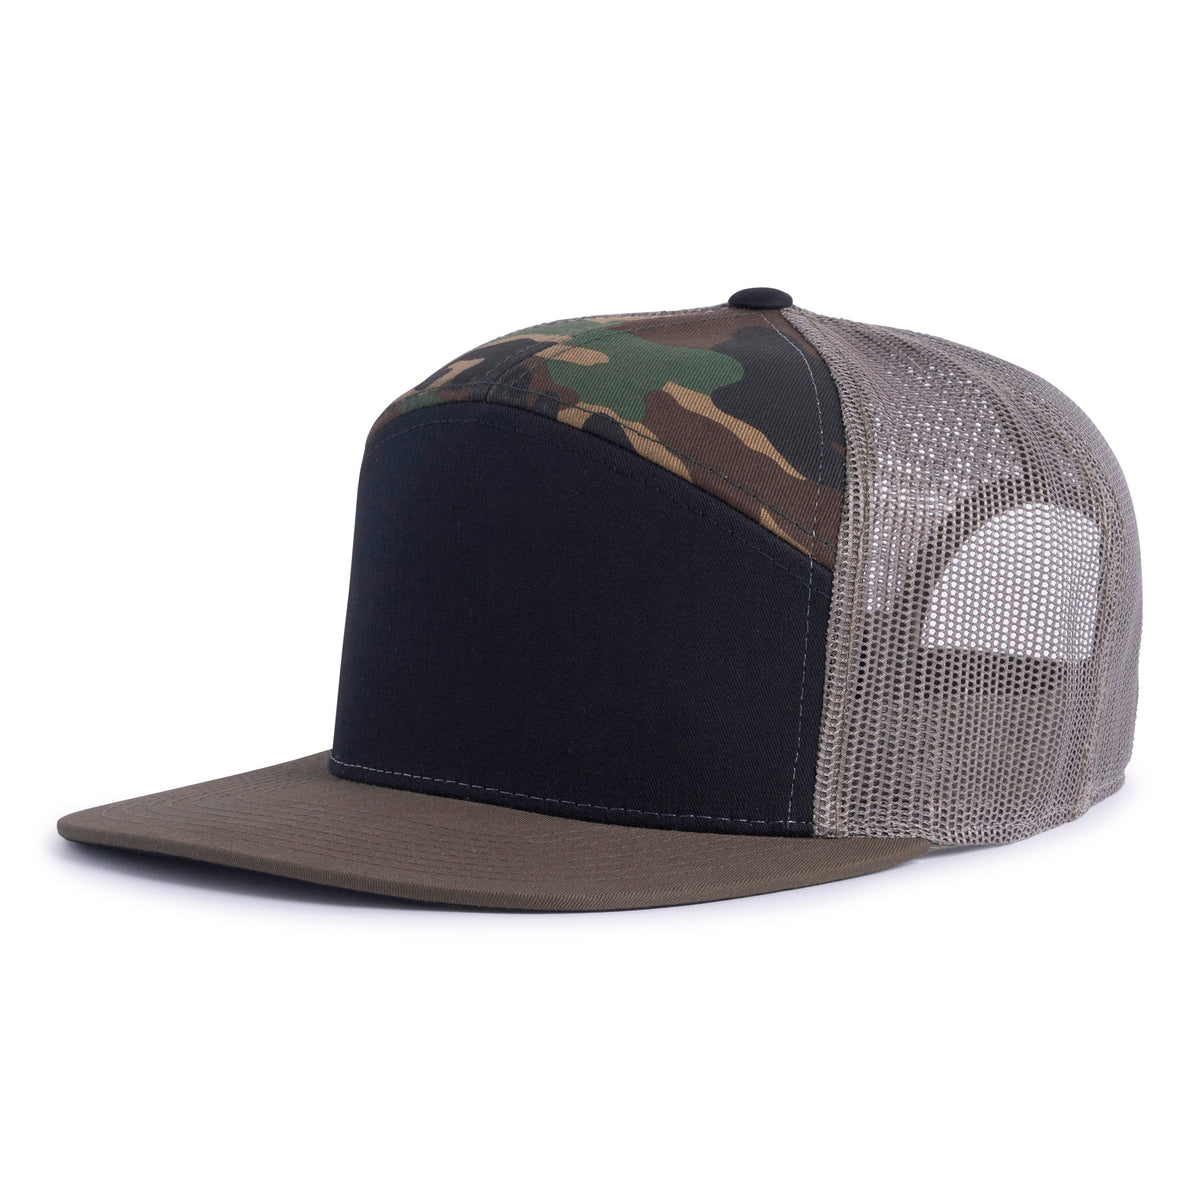 Black, loden green, and camo updated trucker hat with a flat bill, 7-panels, structured mid-high crown, grey mesh back, and a snapback closure from Tailgate Hats.